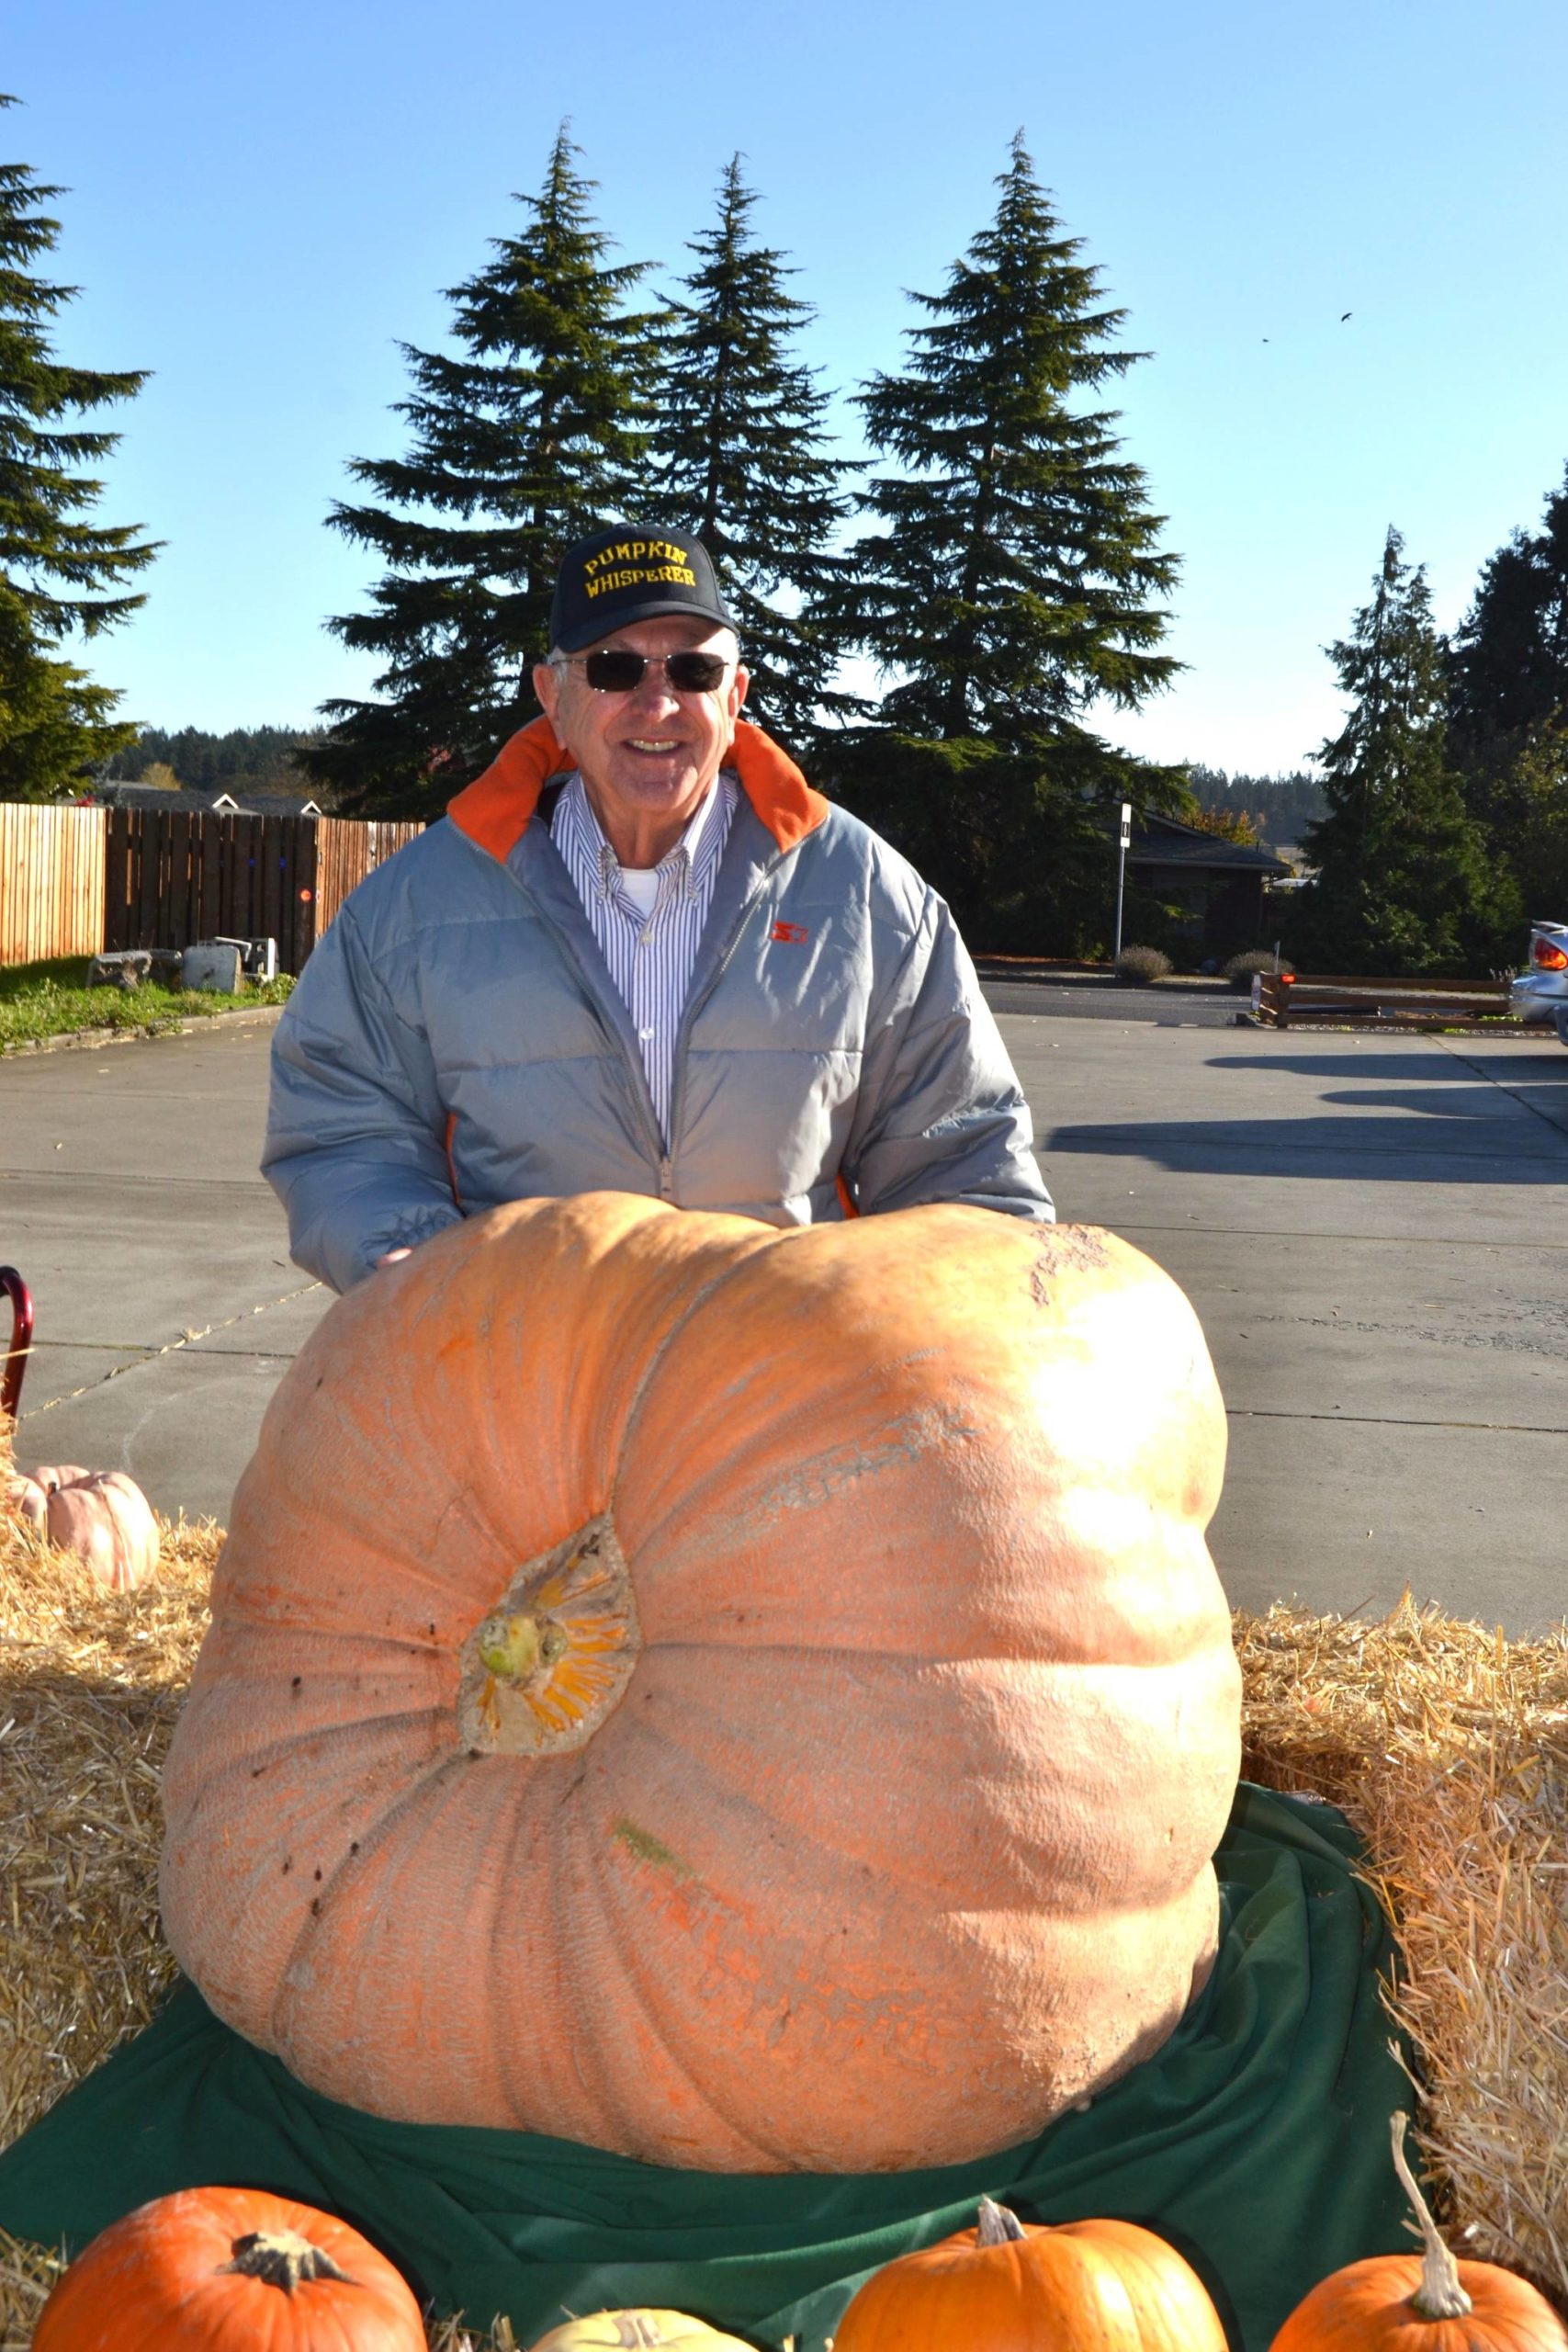 Ross Osborn brought his giant pumpkin to JACE Real Estate Company to share with people for Halloween. Visitors can guess its weight and/or post selfies to JACE’s social media page for a chance to win local gift certificates. Sequim Gazette photo by Matthew Nash